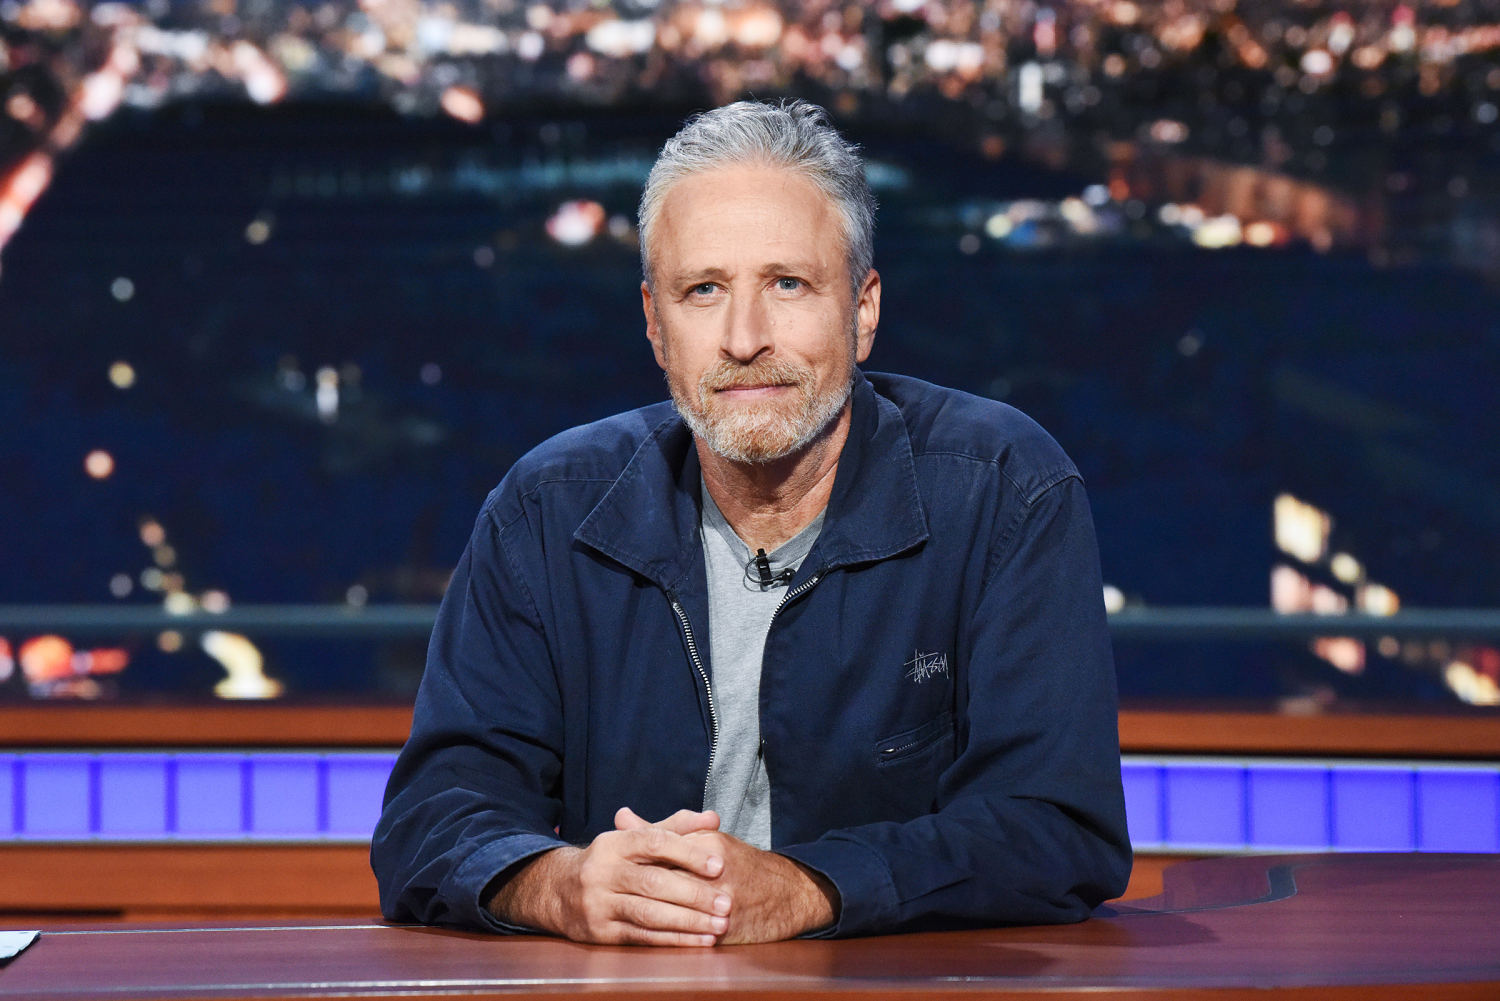 In self-deprecating return to ‘The Daily Show’, Jon Stewart beats his critics to the punch